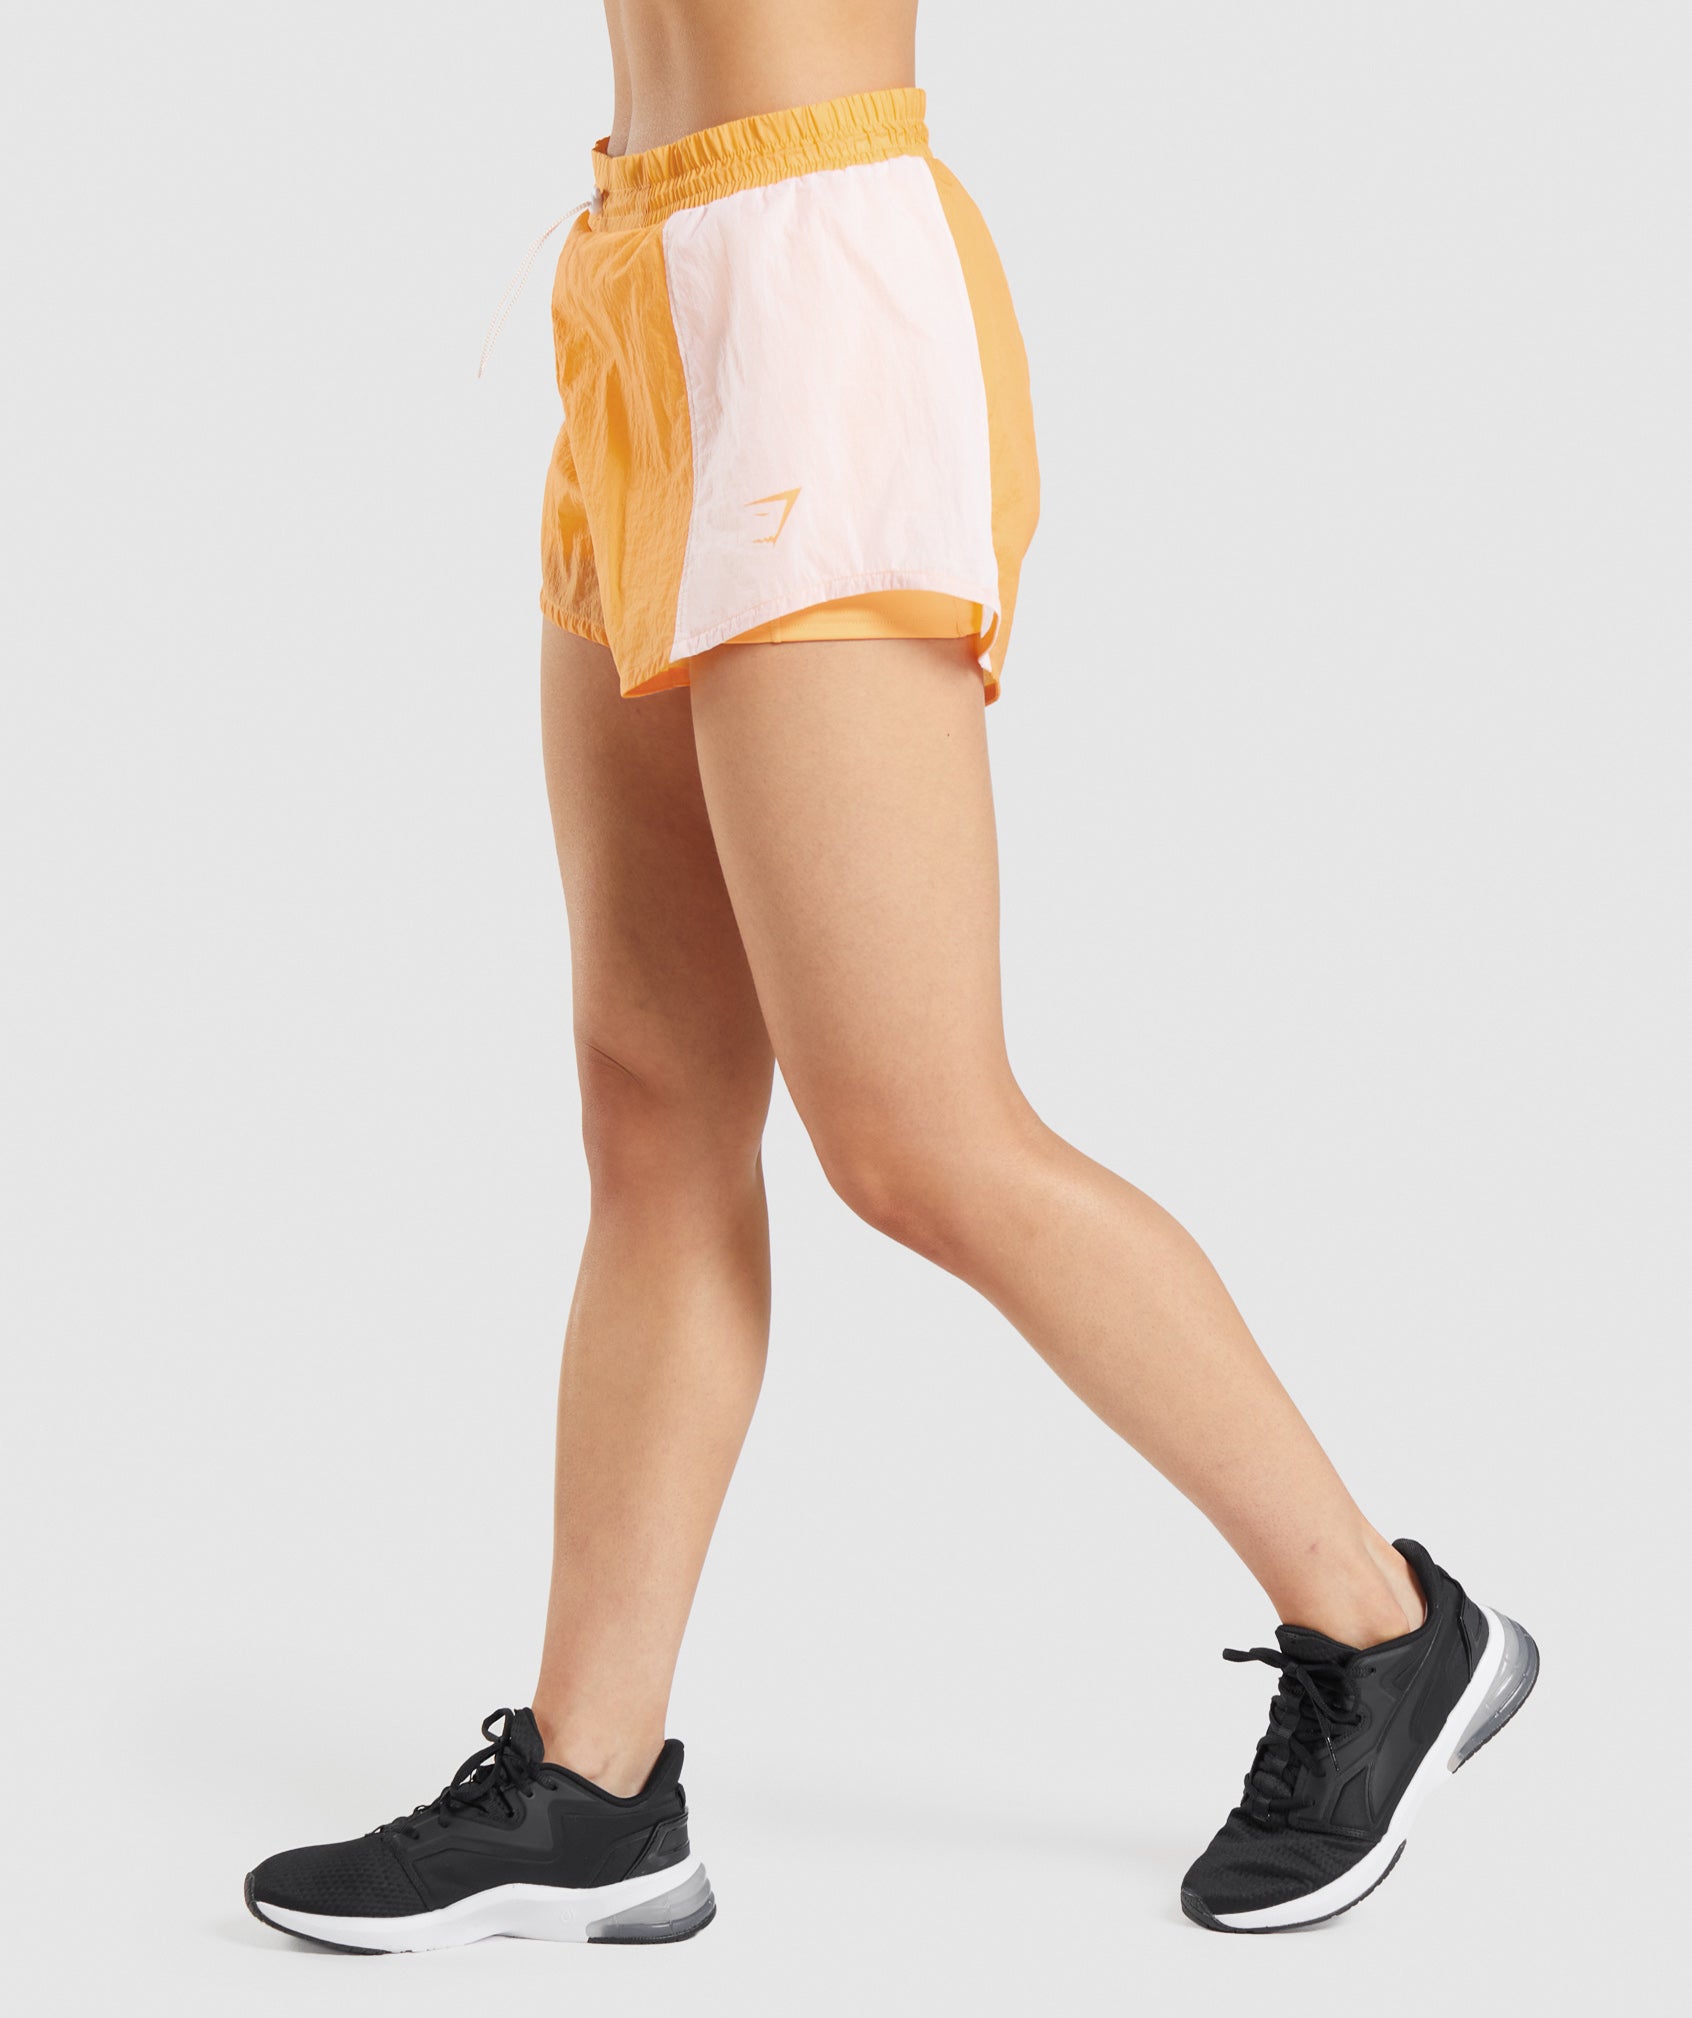 Pulse 2 In 1 Shorts in Apricot Orange/White - view 3